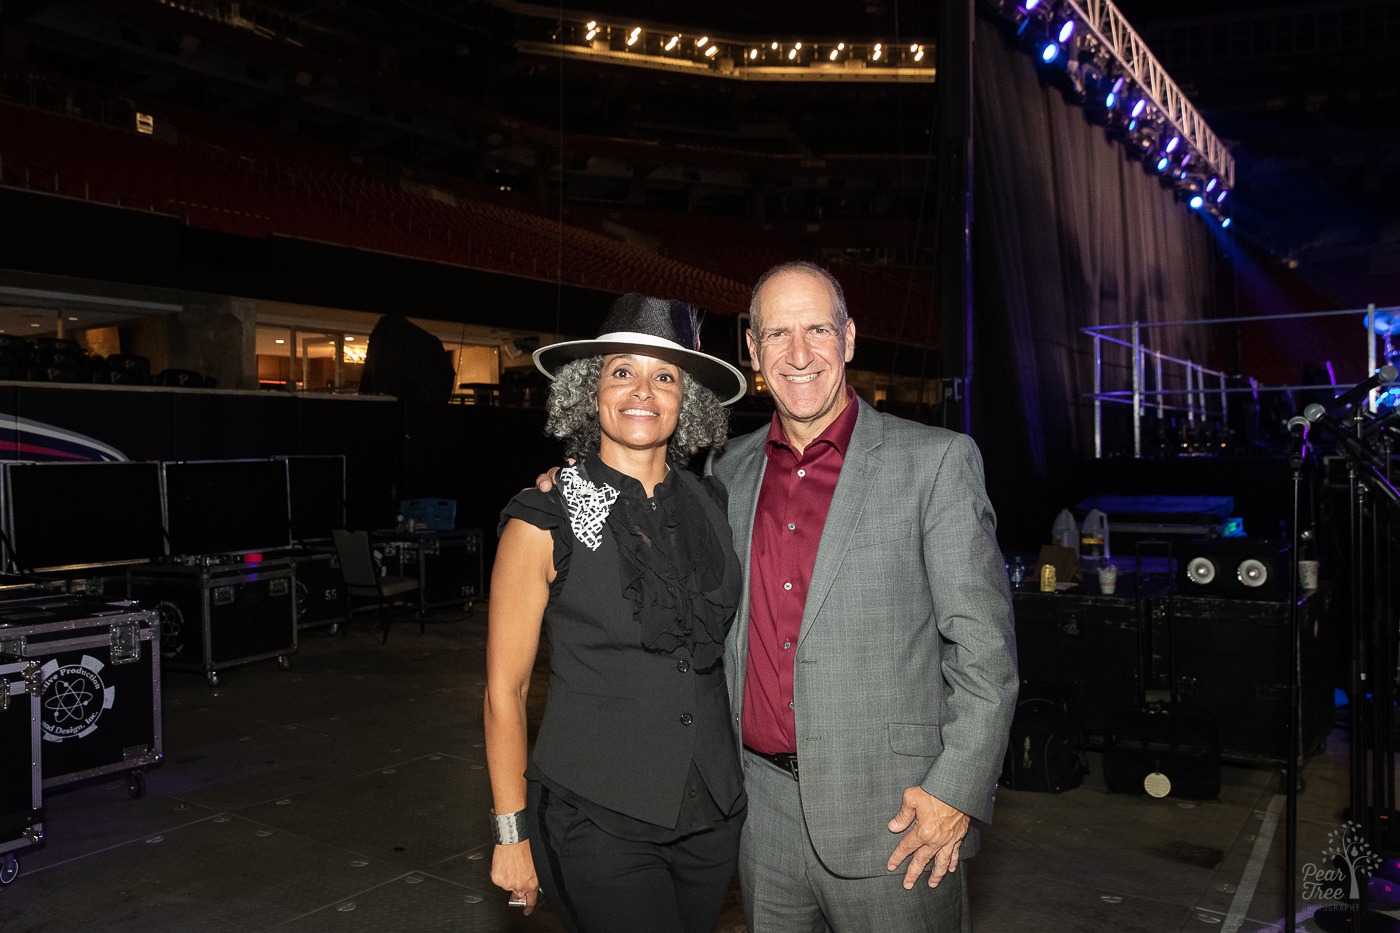 Dr. Alie Redd standing close and smiling with Neil Berg. Inside Mercedes Benz stage after Night of Broadway Stars 2021 event for Covenant House Georgia.